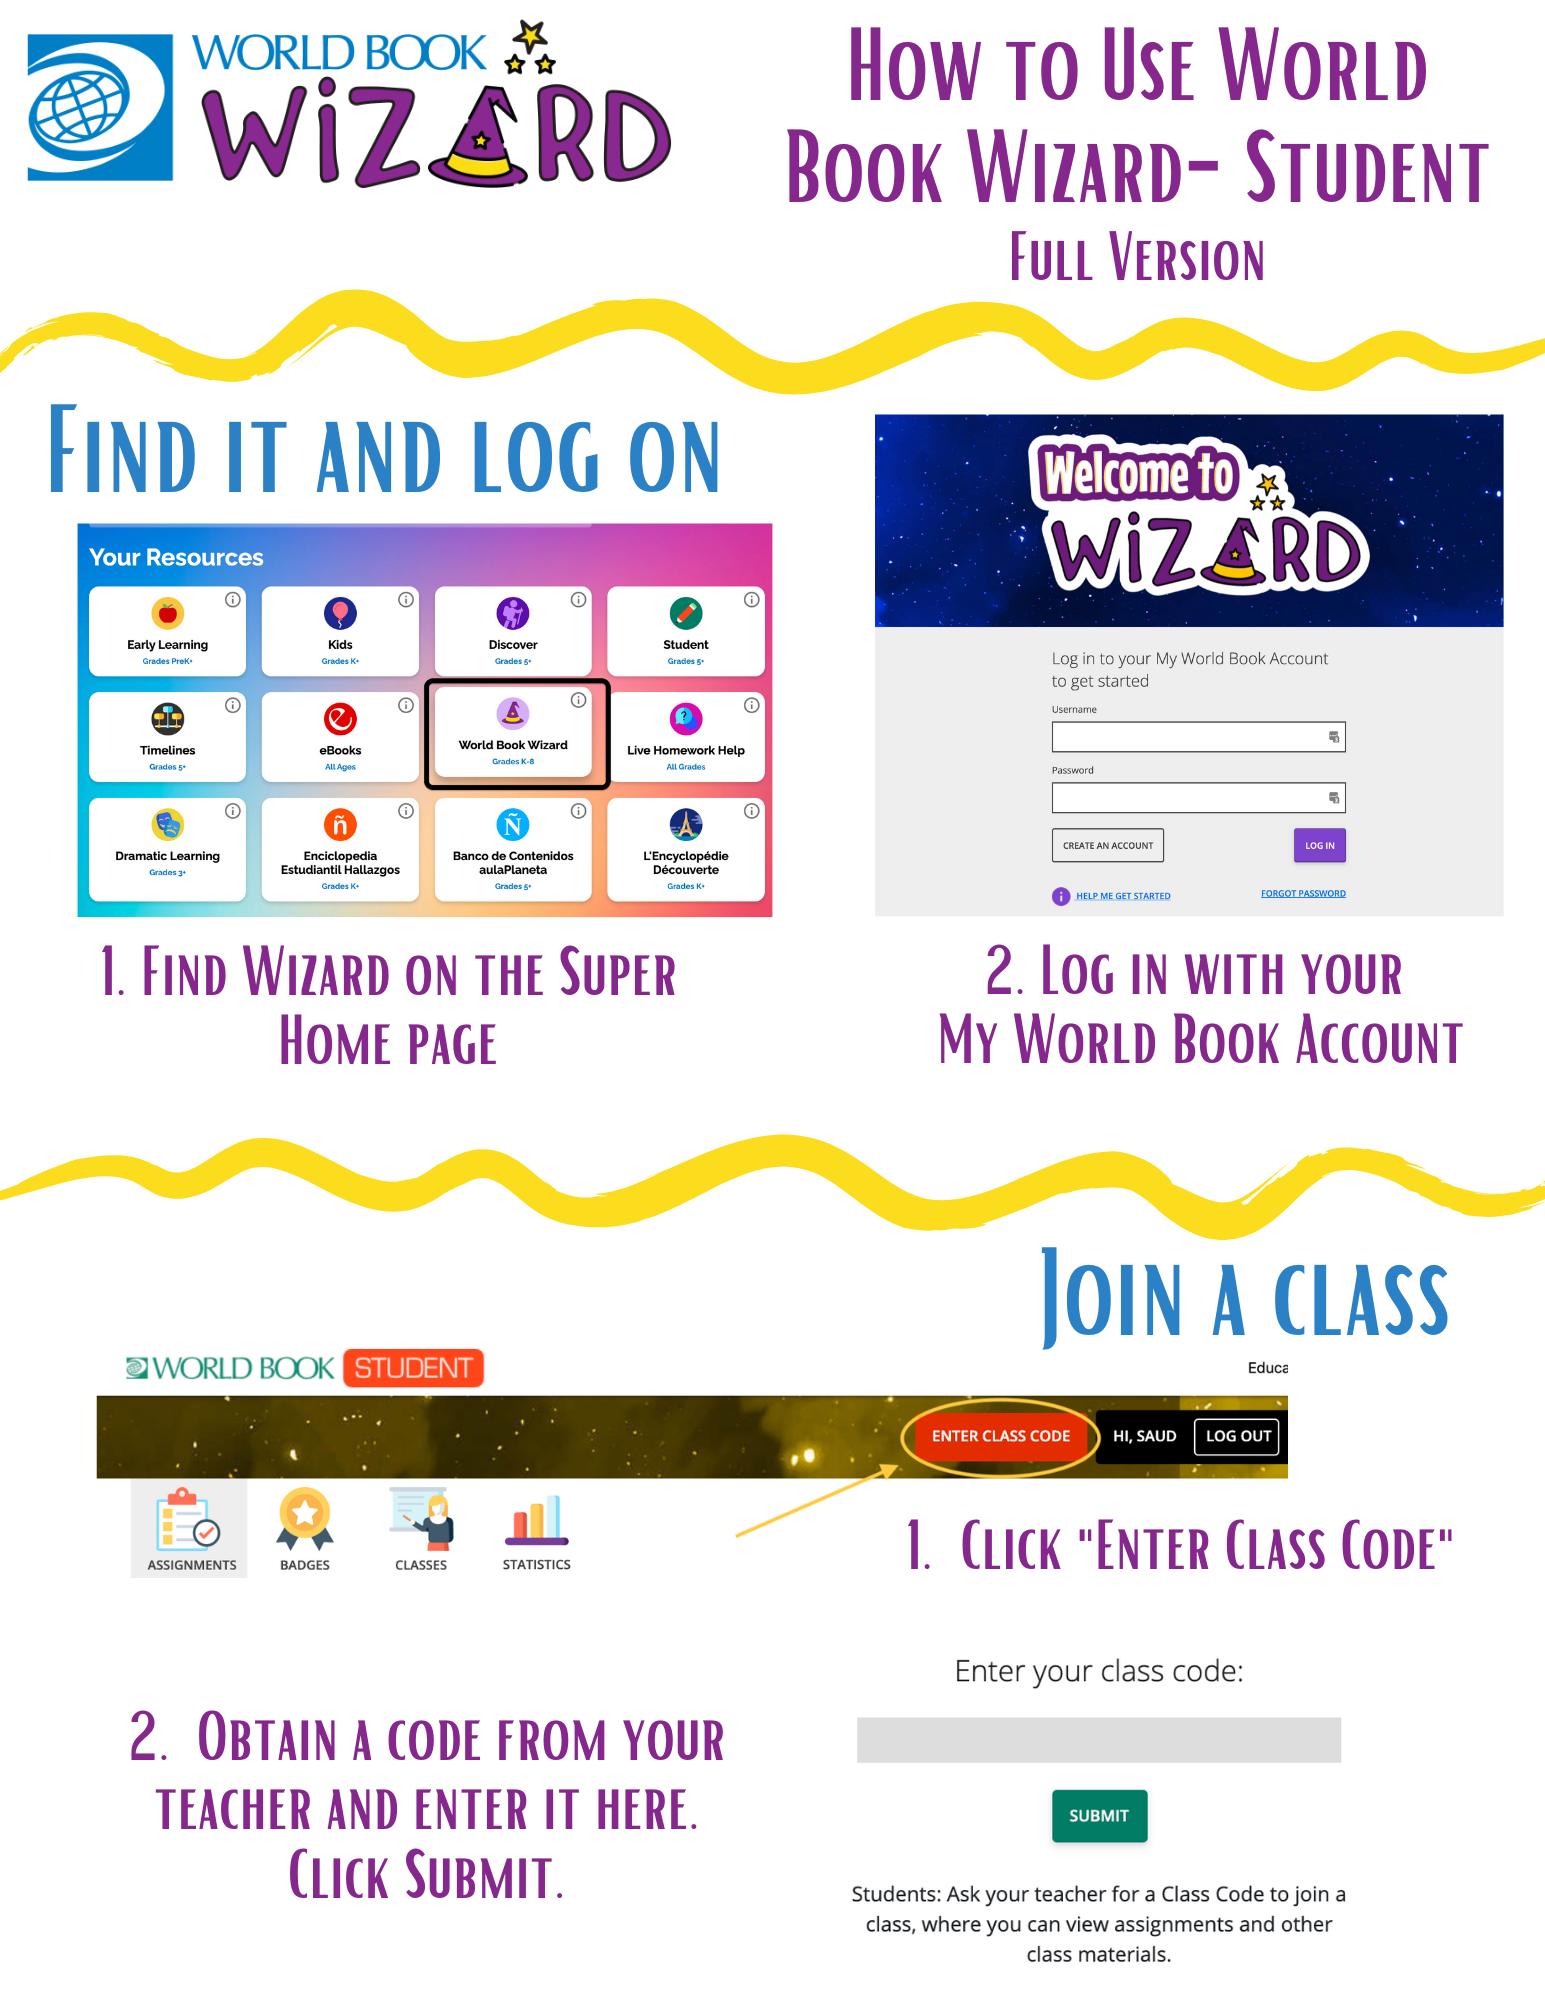 Use Wizard Student Account